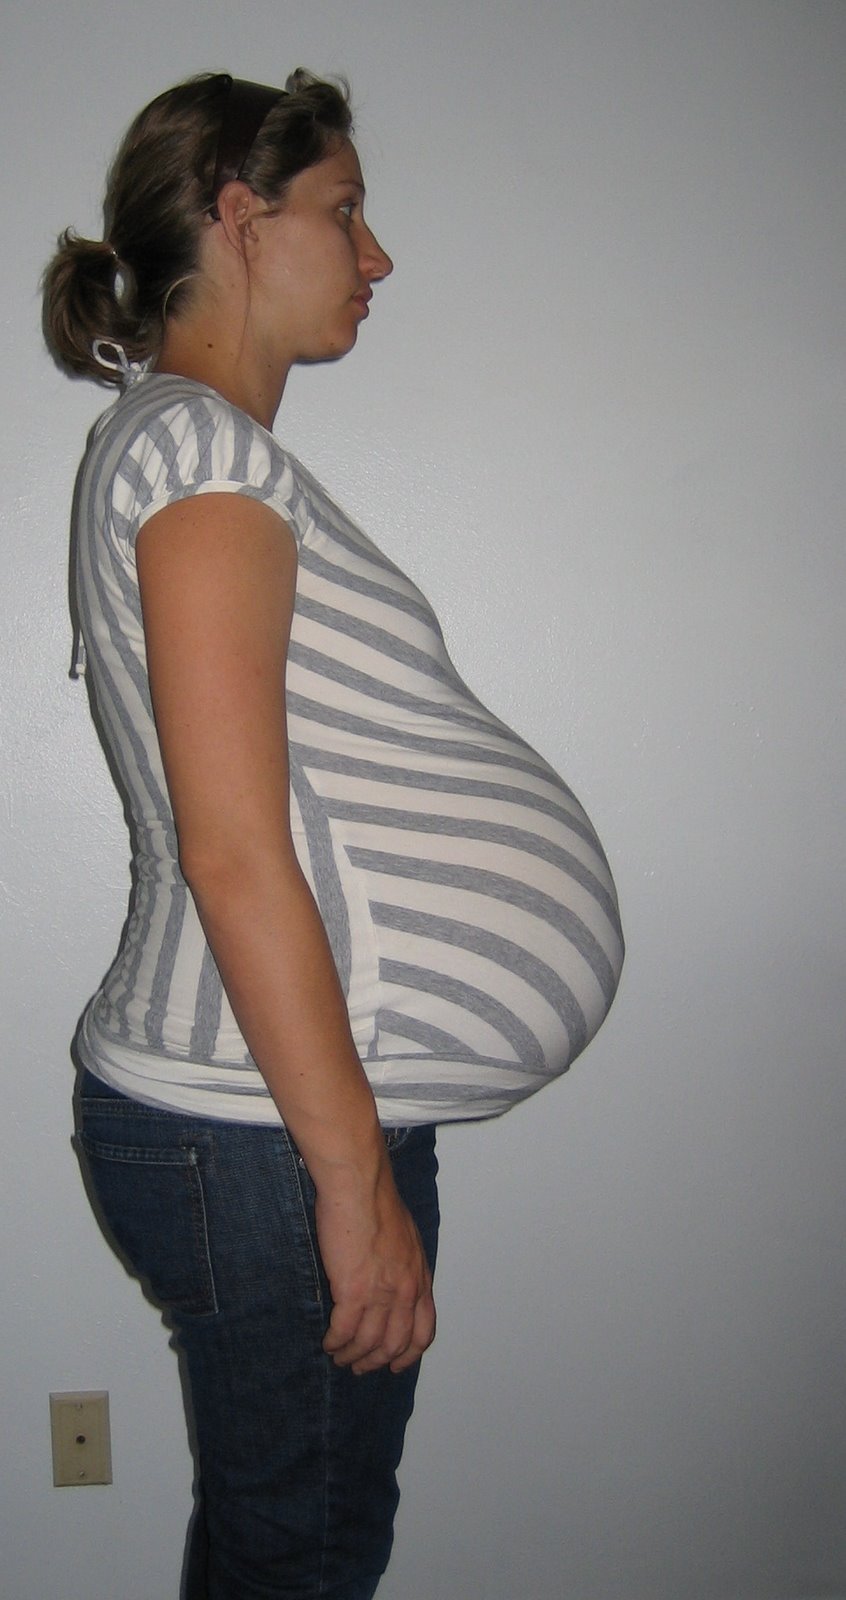 36 weeks pregnant with twins